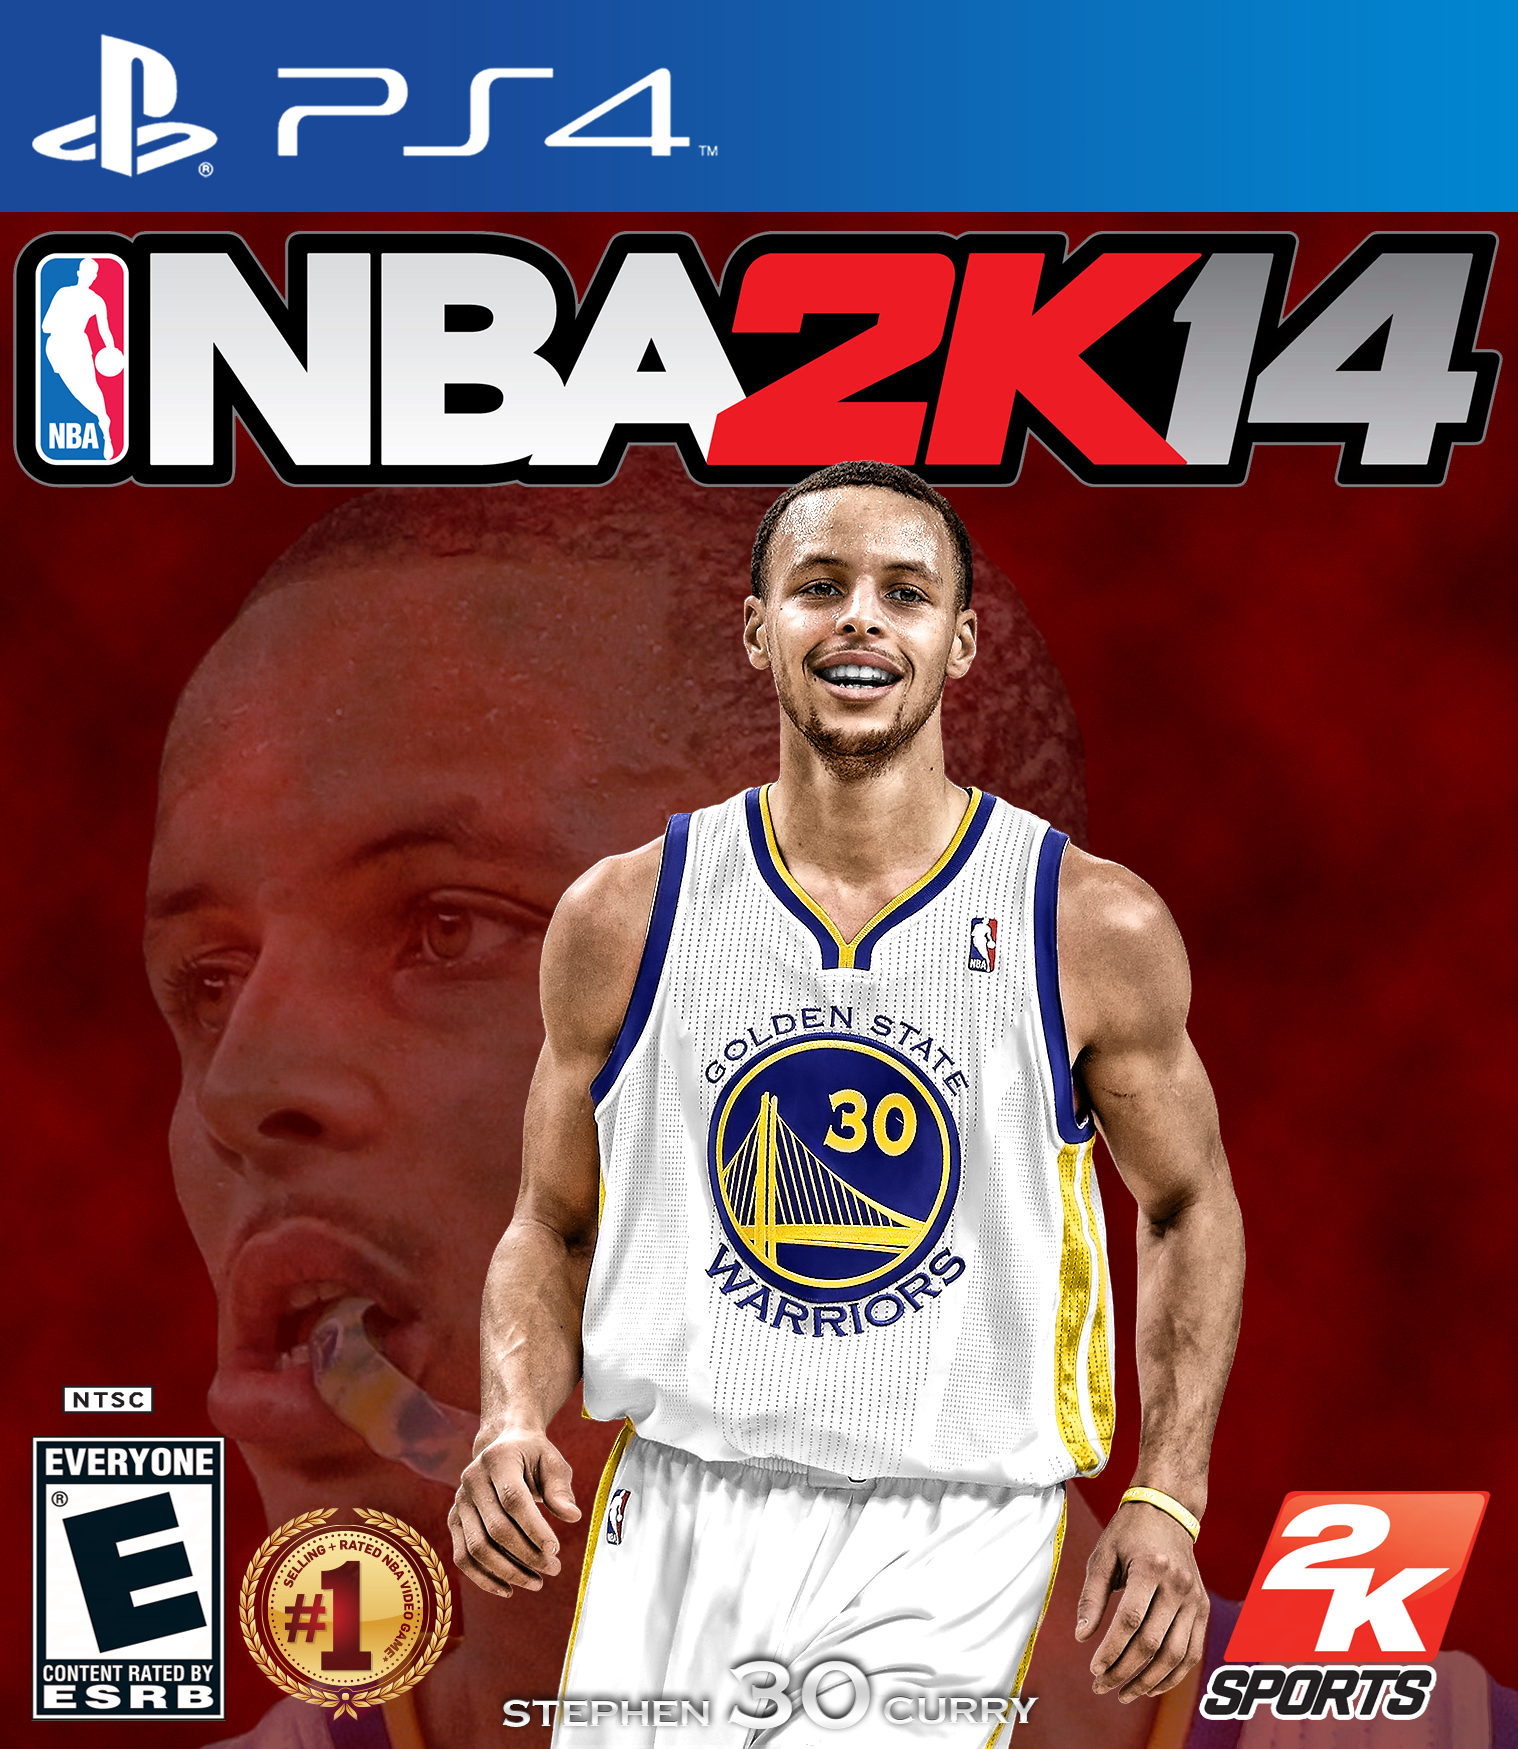 nba_2k14_curry_cover_by_chronoxiong-d6guyrk.png